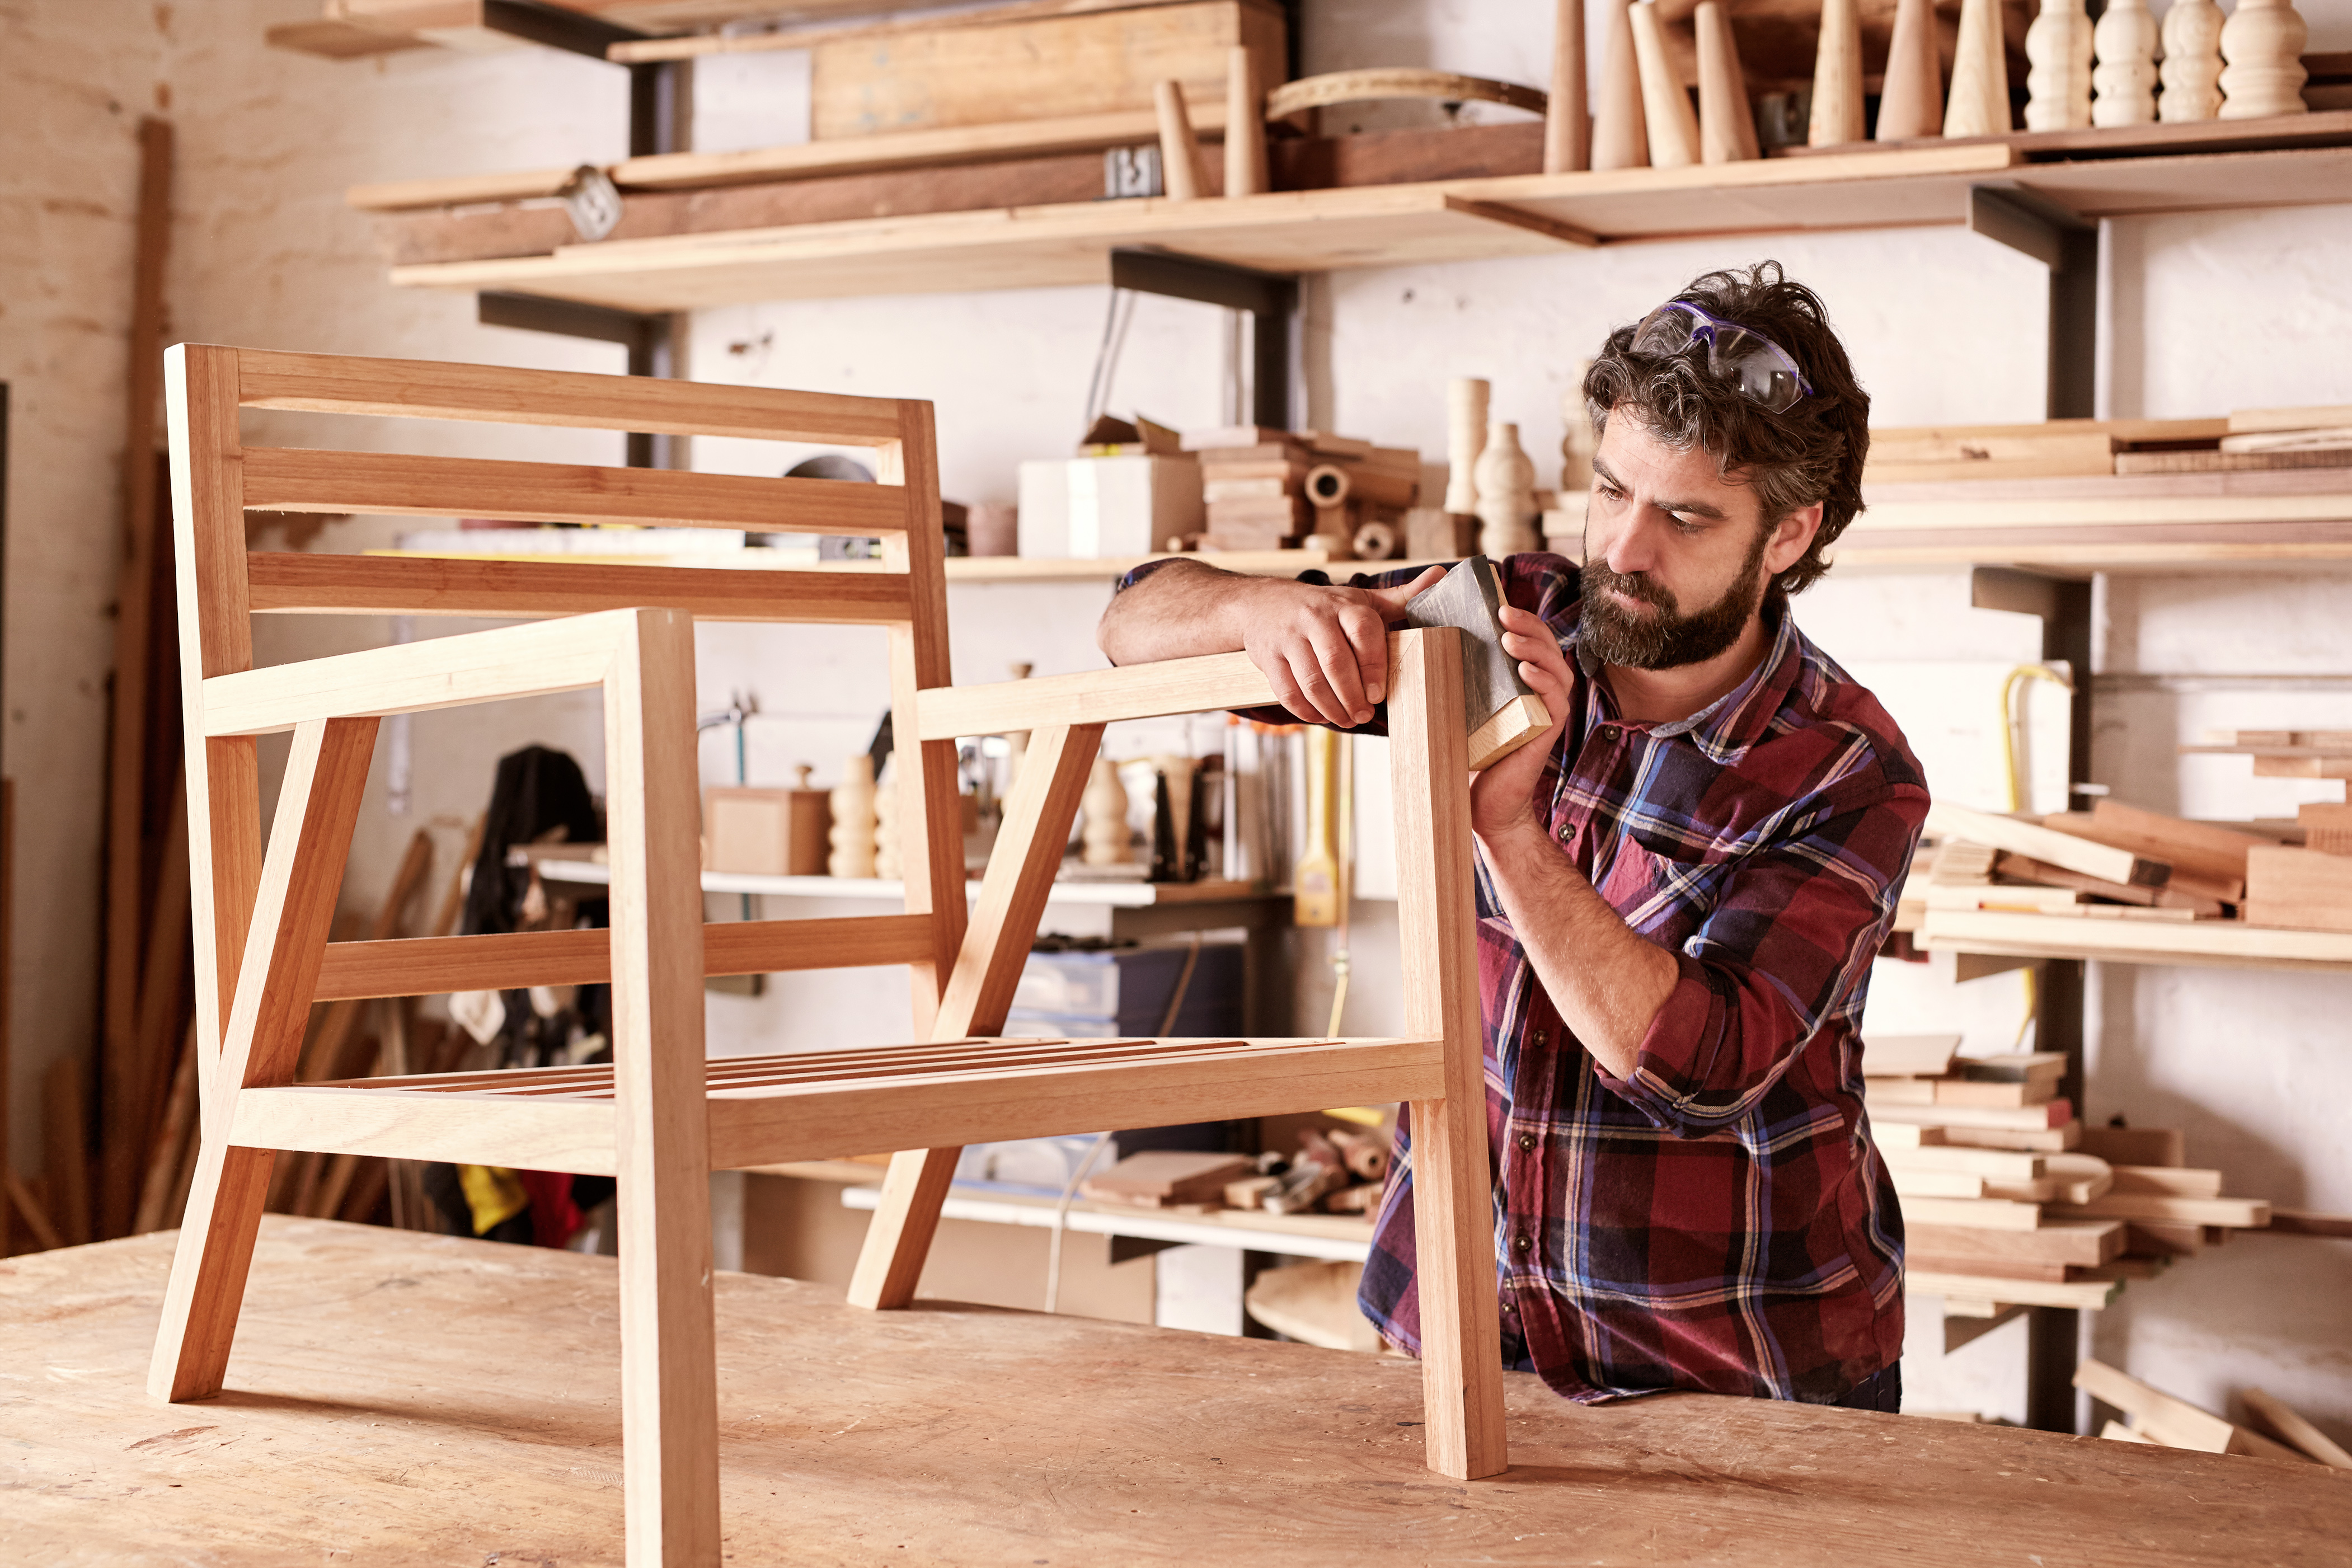 Serious furniture designer carefully sanding a chair frame that he is busy manufacturing in his woodwork studio, with shelves of wooden items behind him